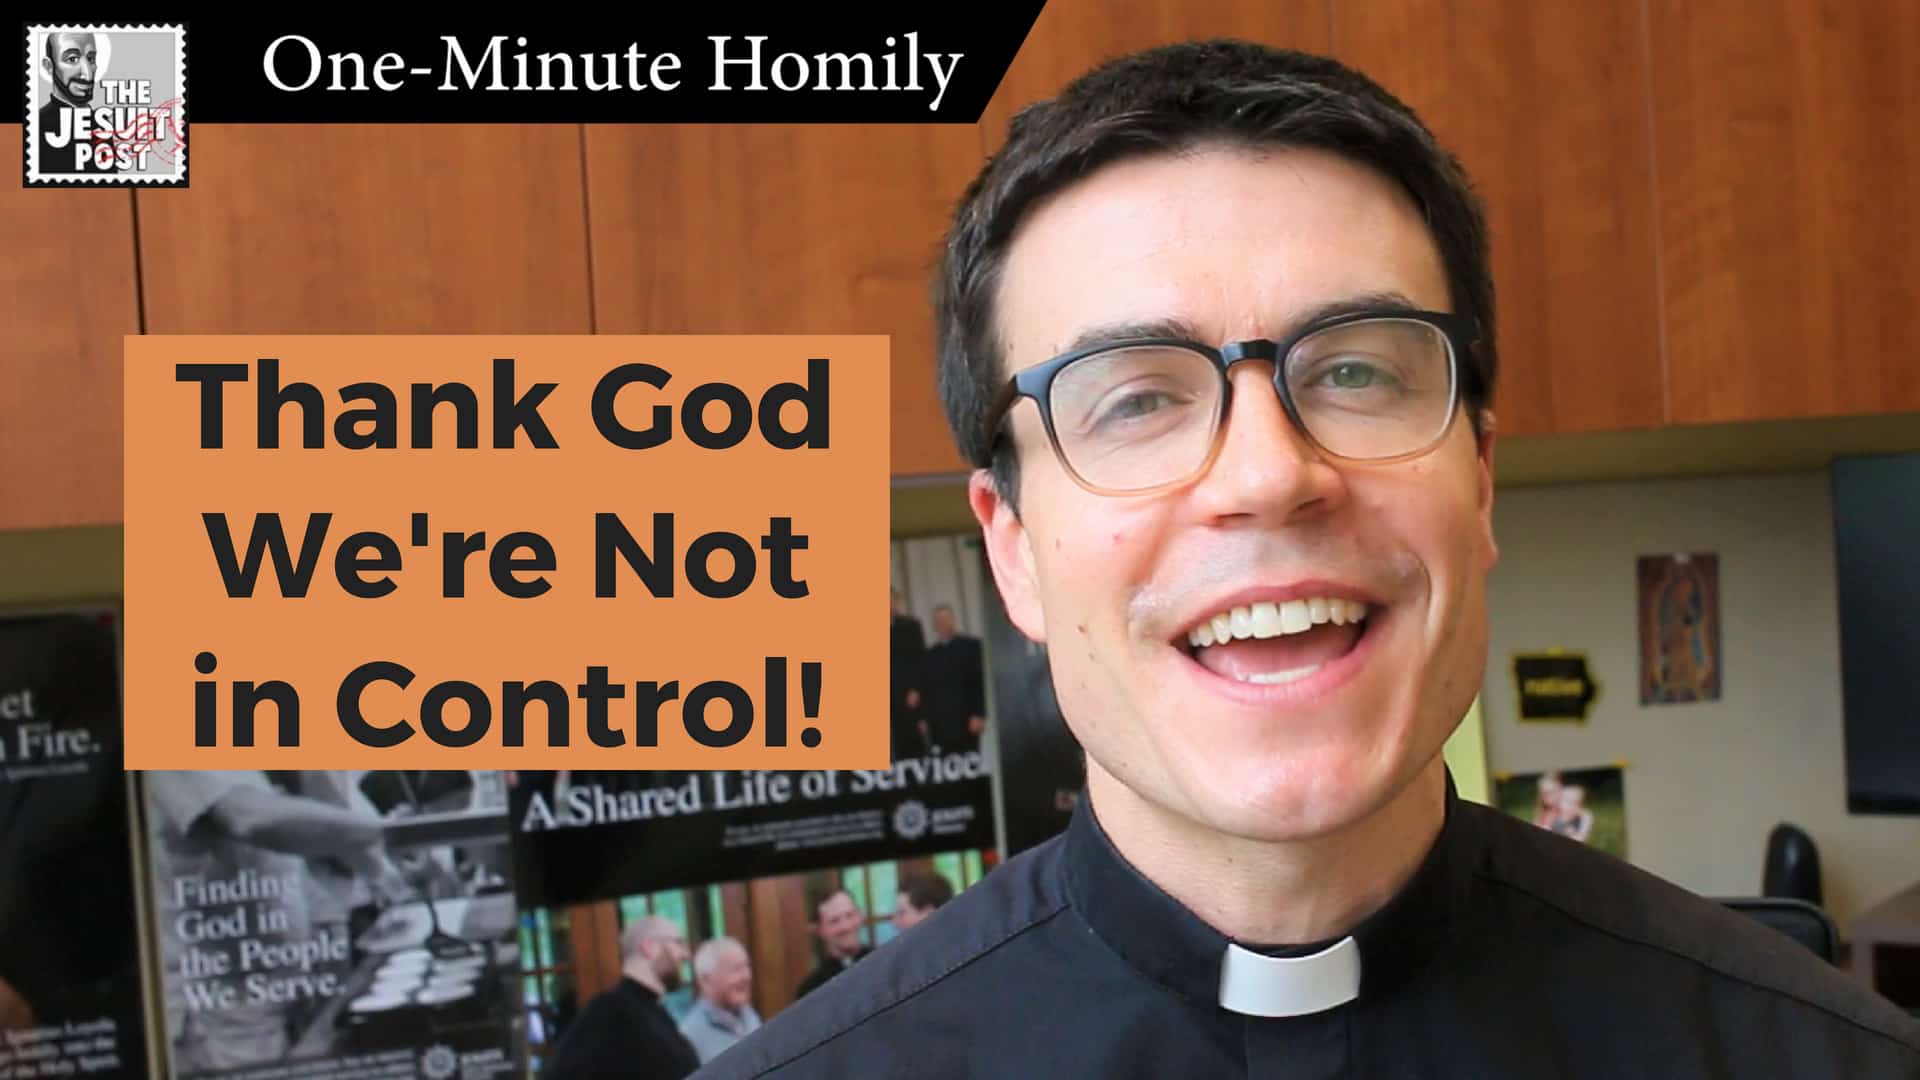 One-Minute Homily: “Thank God We’re Not in Control”